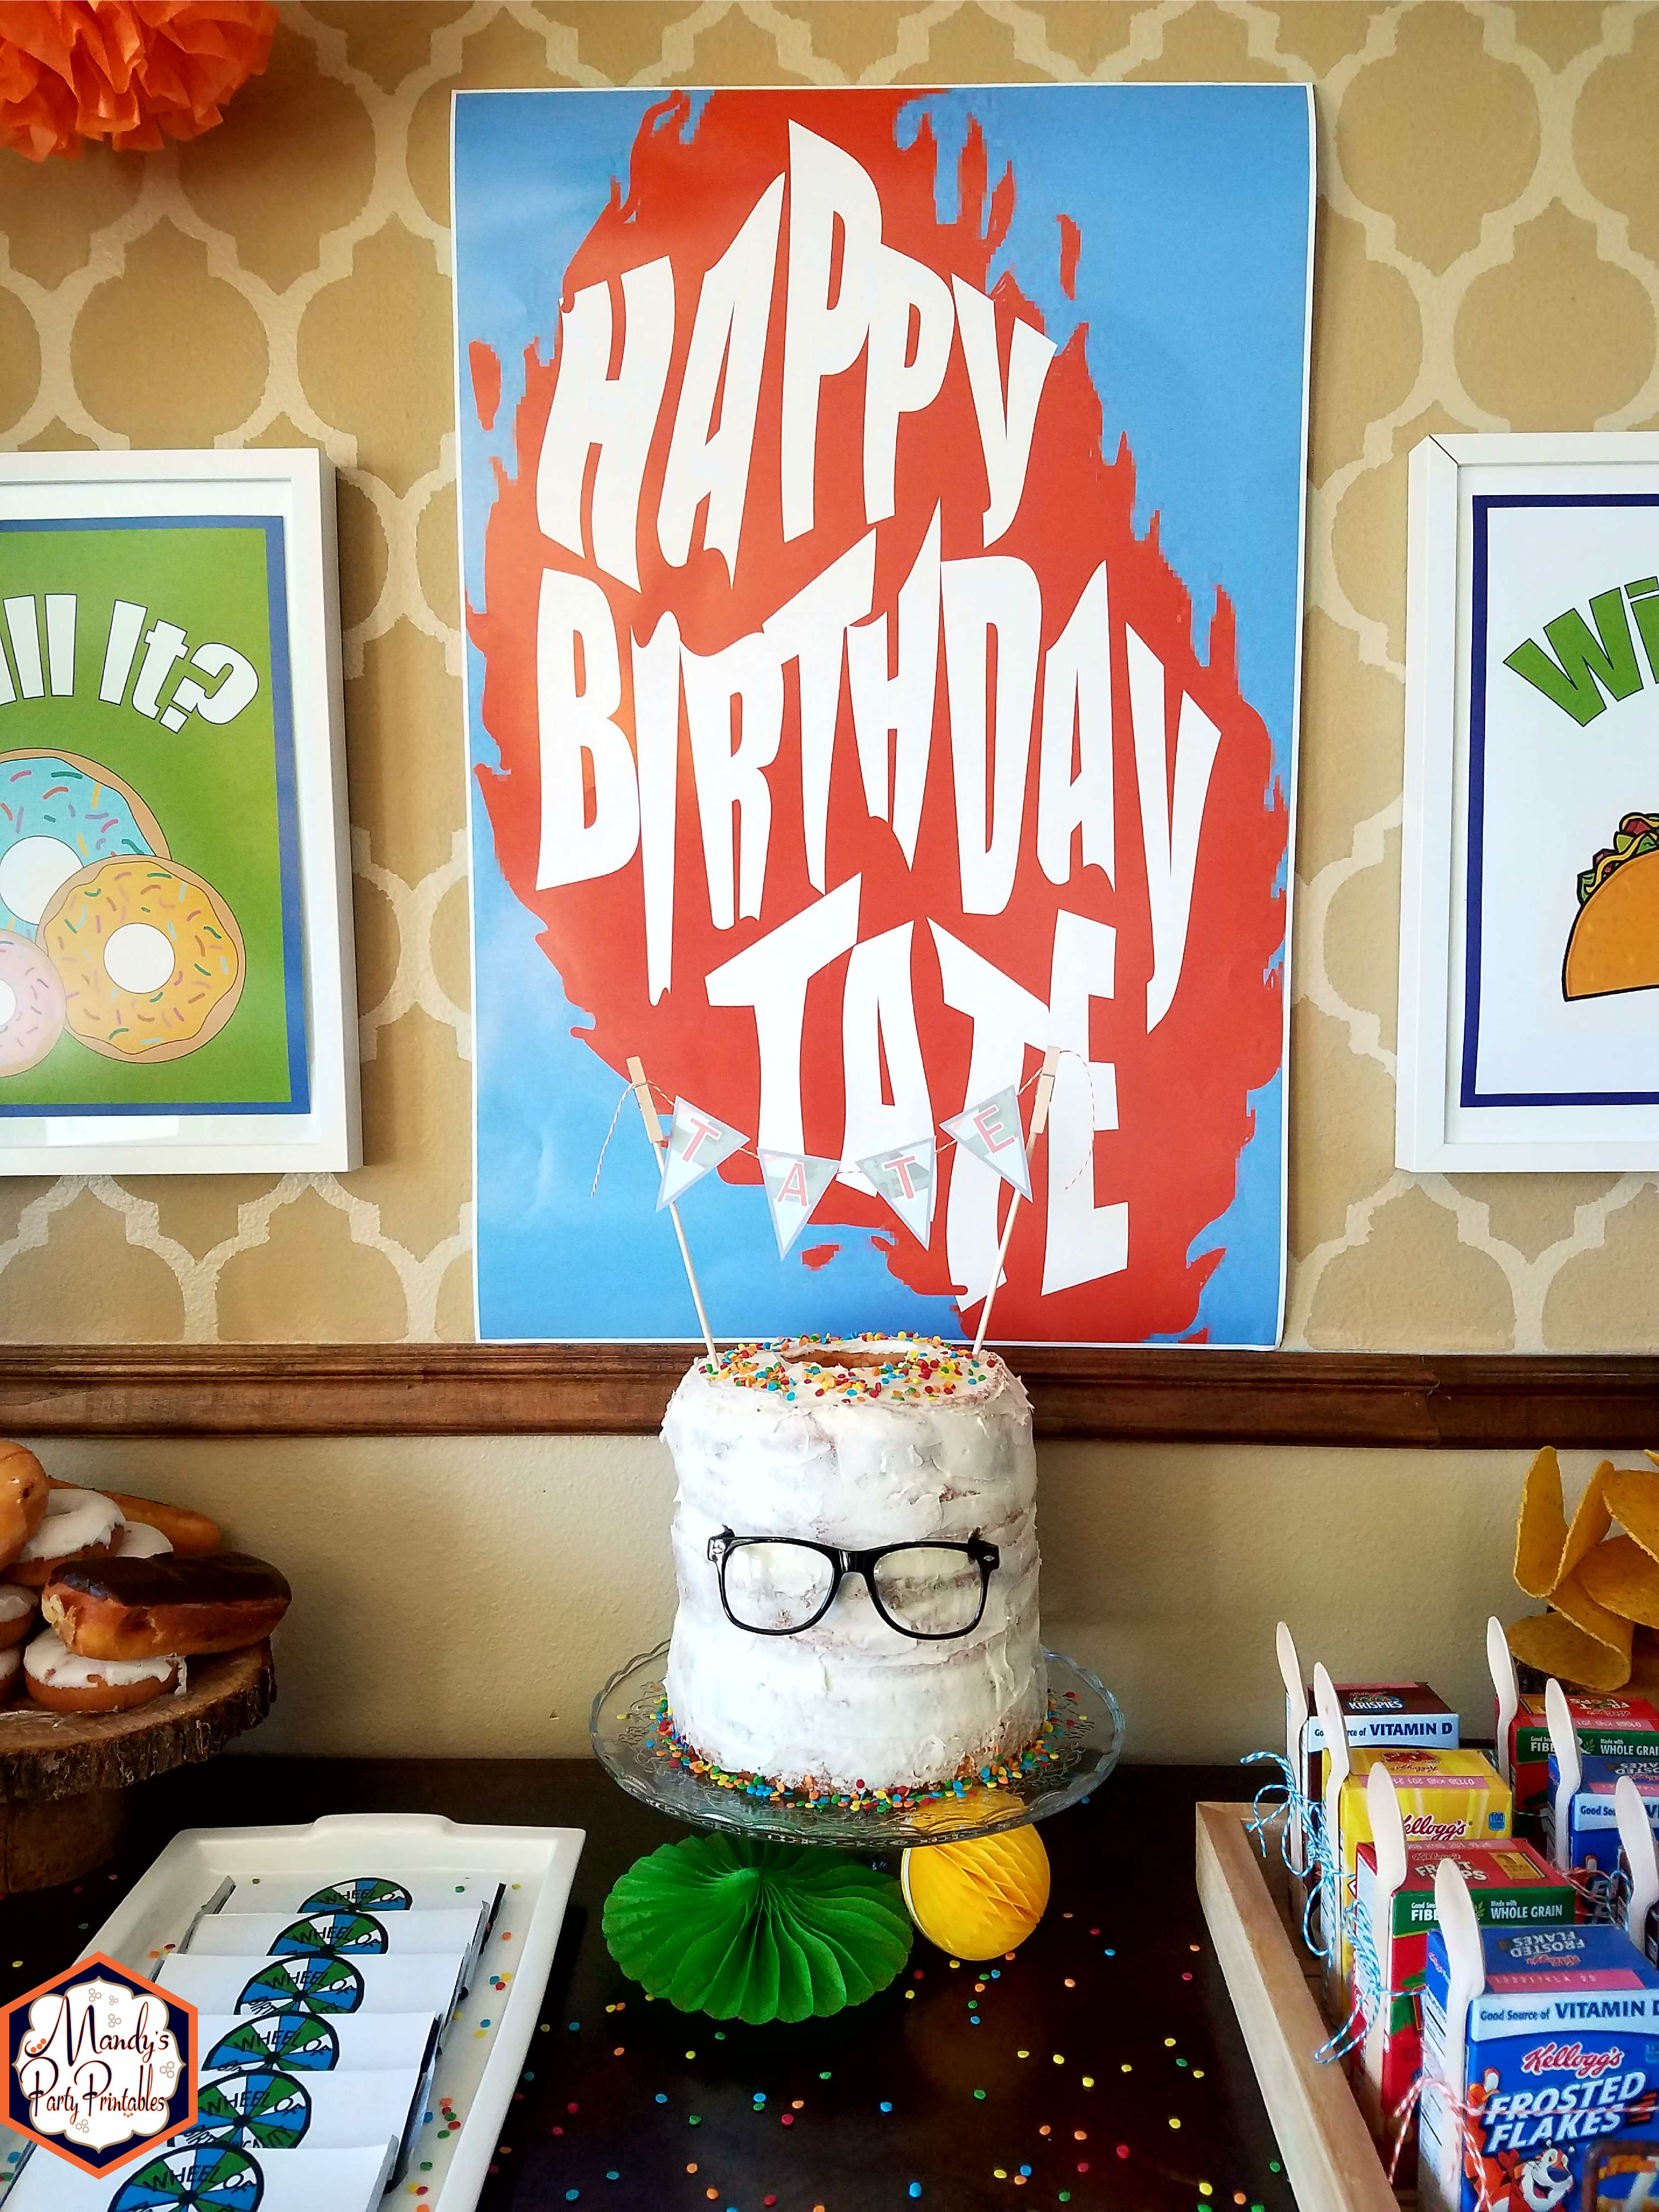 Cakescape from Good Mythical Morning Inspired Birthday Party via Mandy's Party Printables